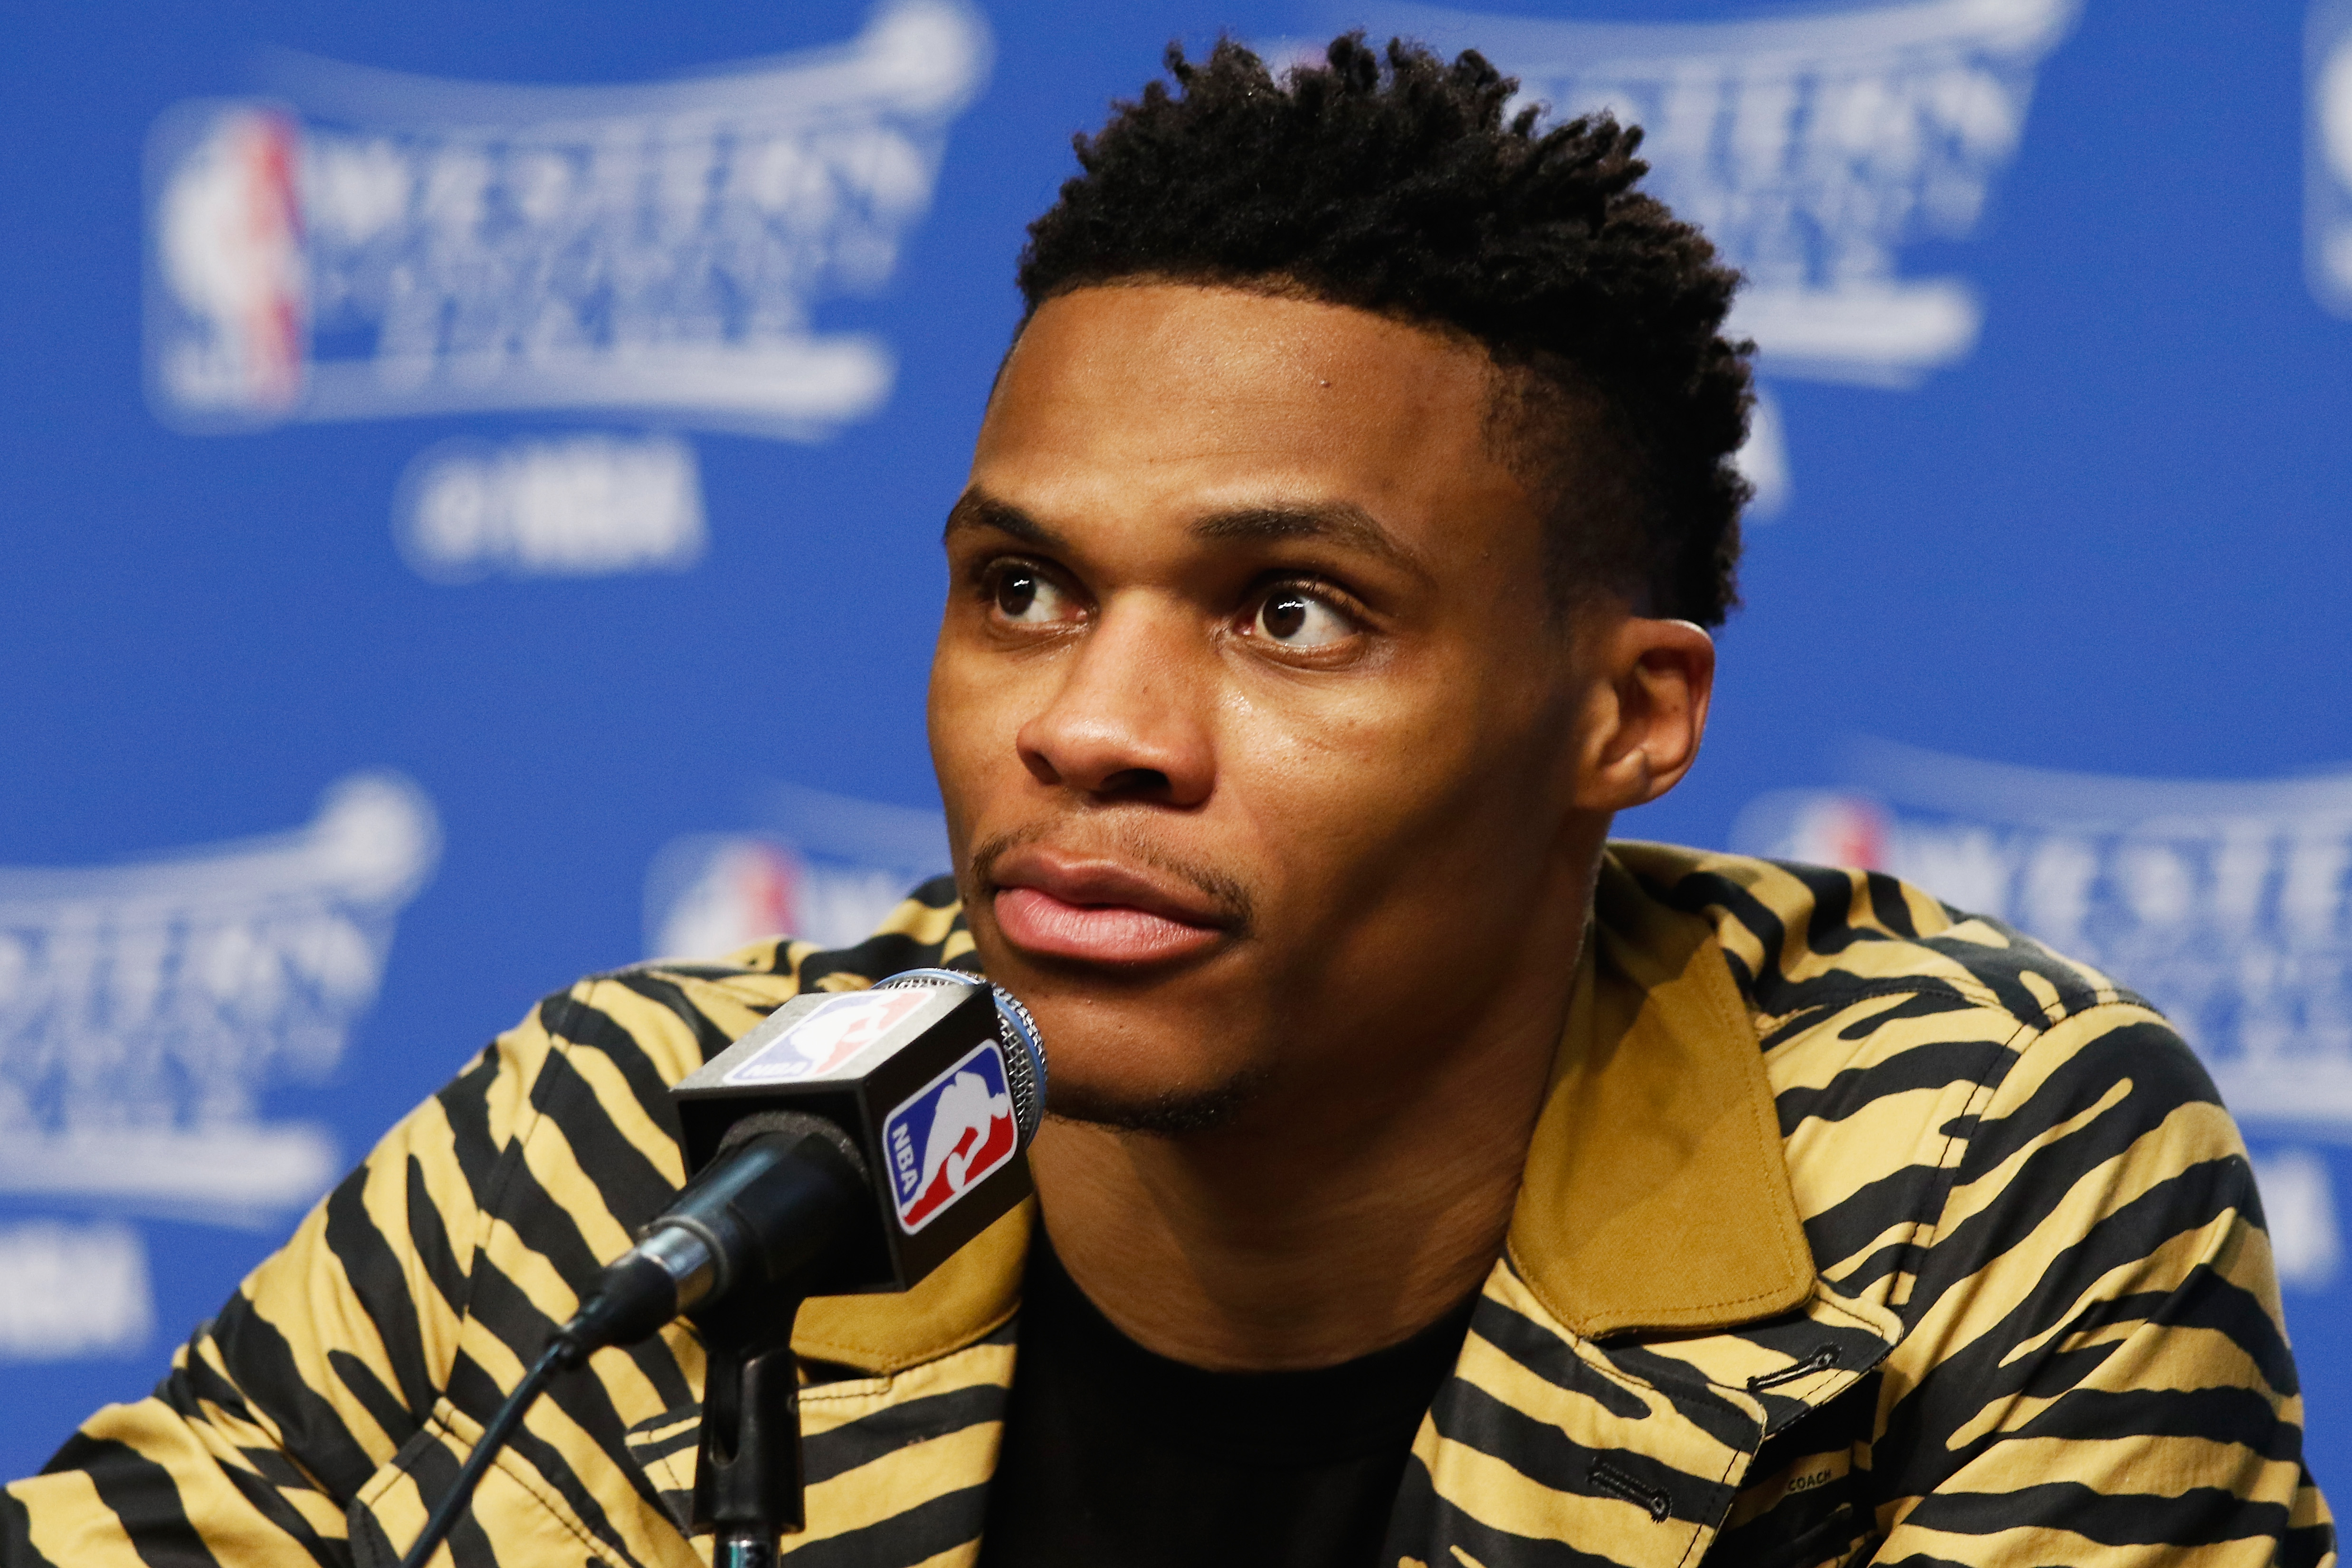 OKLAHOMA CITY, OK - MAY 28: Russell Westbrook #0 of the Oklahoma City Thunder looks on during a press conference after the Golden State Warriors defeated the Oklahoma City Thunder 108-101 in game six of the Western Conference Finals during the 2016 NBA Playoffs at Chesapeake Energy Arena on May 28, 2016 in Oklahoma City, Oklahoma. NOTE TO USER: User expressly acknowledges and agrees that, by downloading and or using this photograph, User is consenting to the terms and conditions of the Getty Images License Agreement.   J Pat Carter/Getty Images/AFP